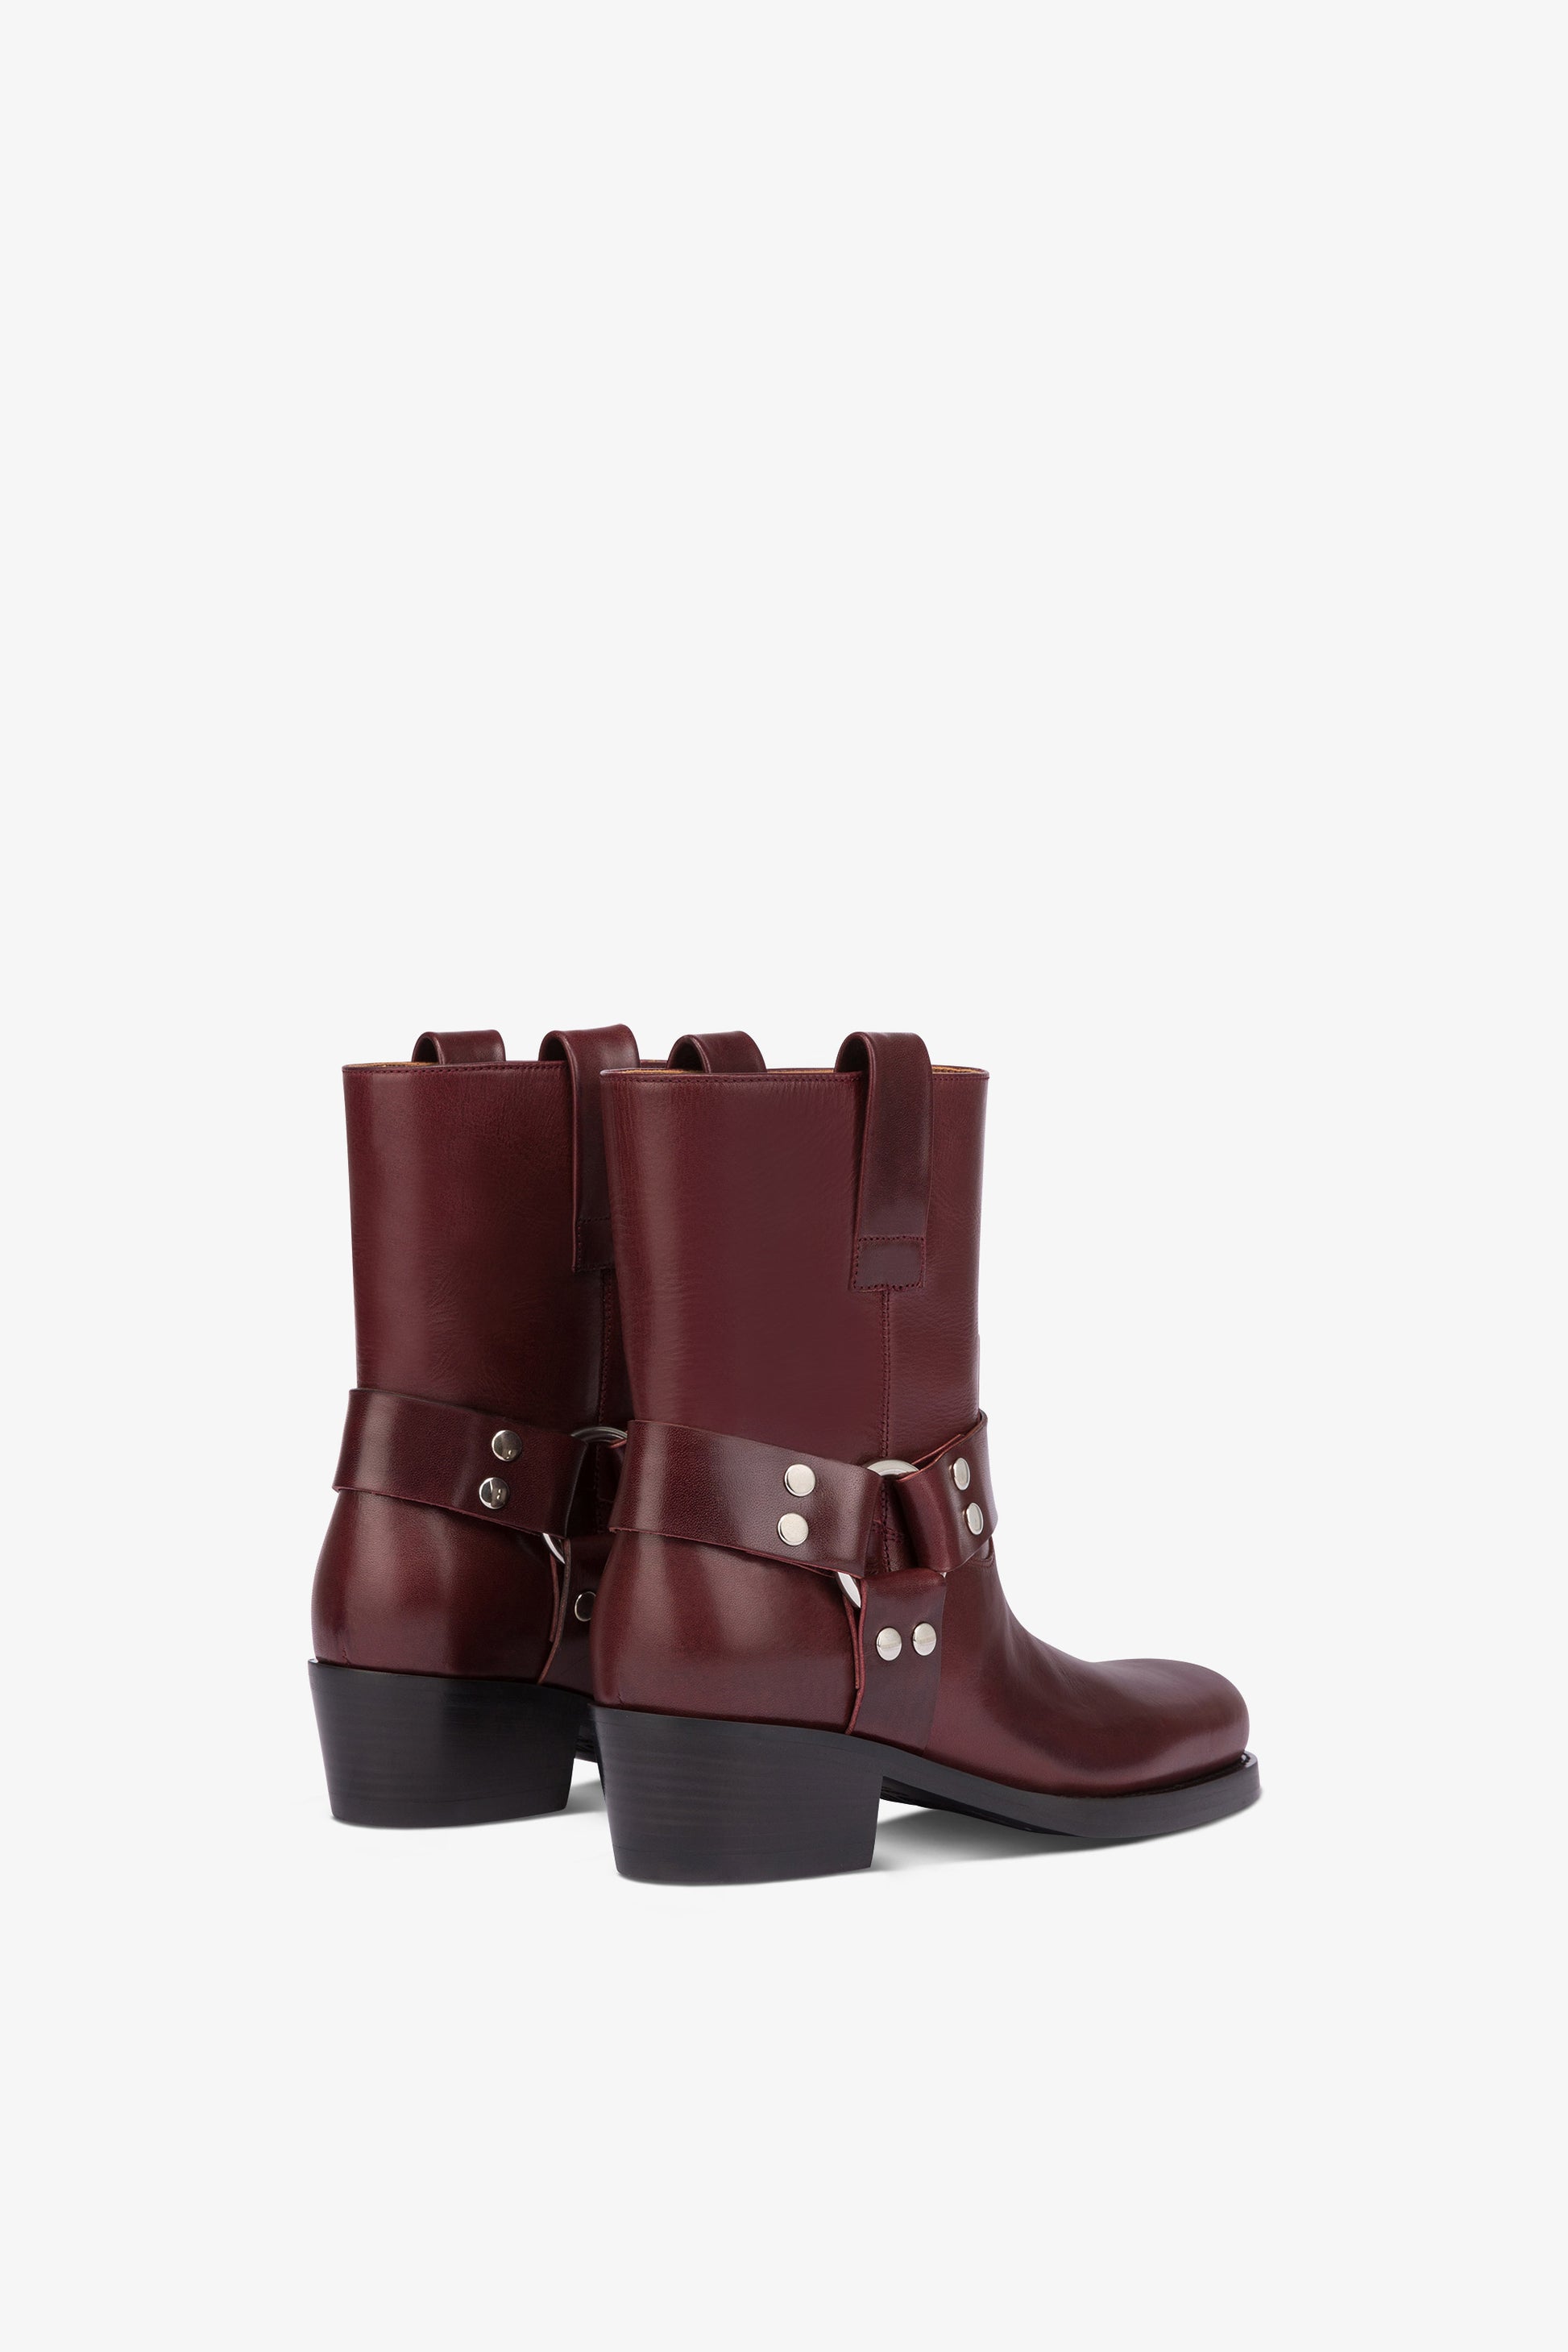 Square-toe ankle boots in soft plum leather